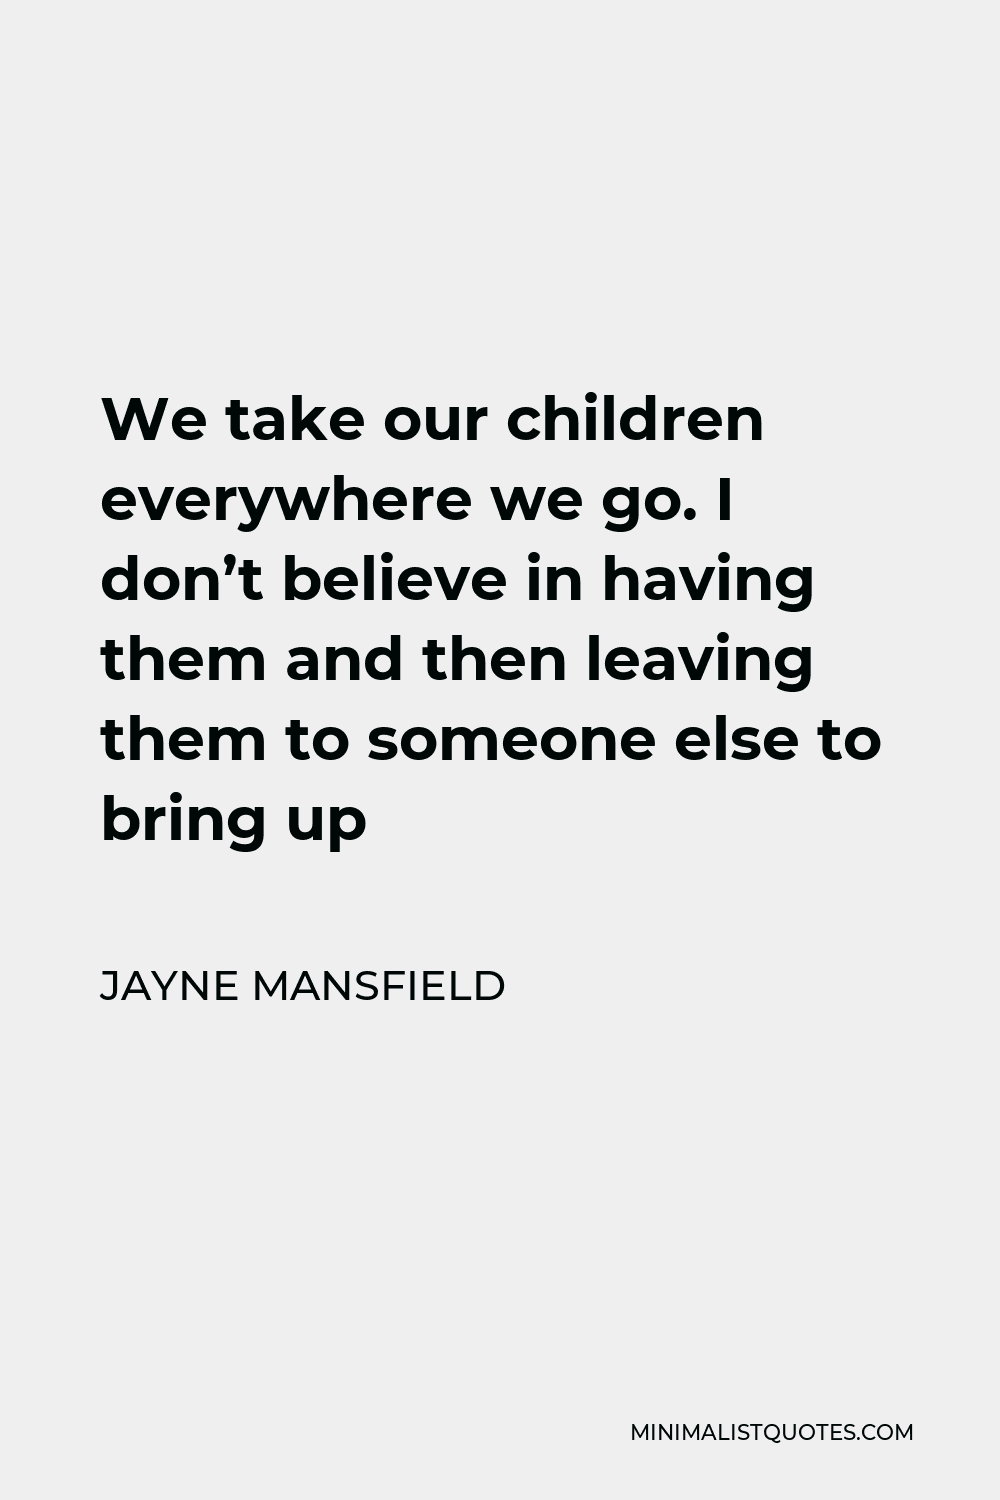 Jayne Mansfield Quote - We take our children everywhere we go. I don’t believe in having them and then leaving them to someone else to bring up